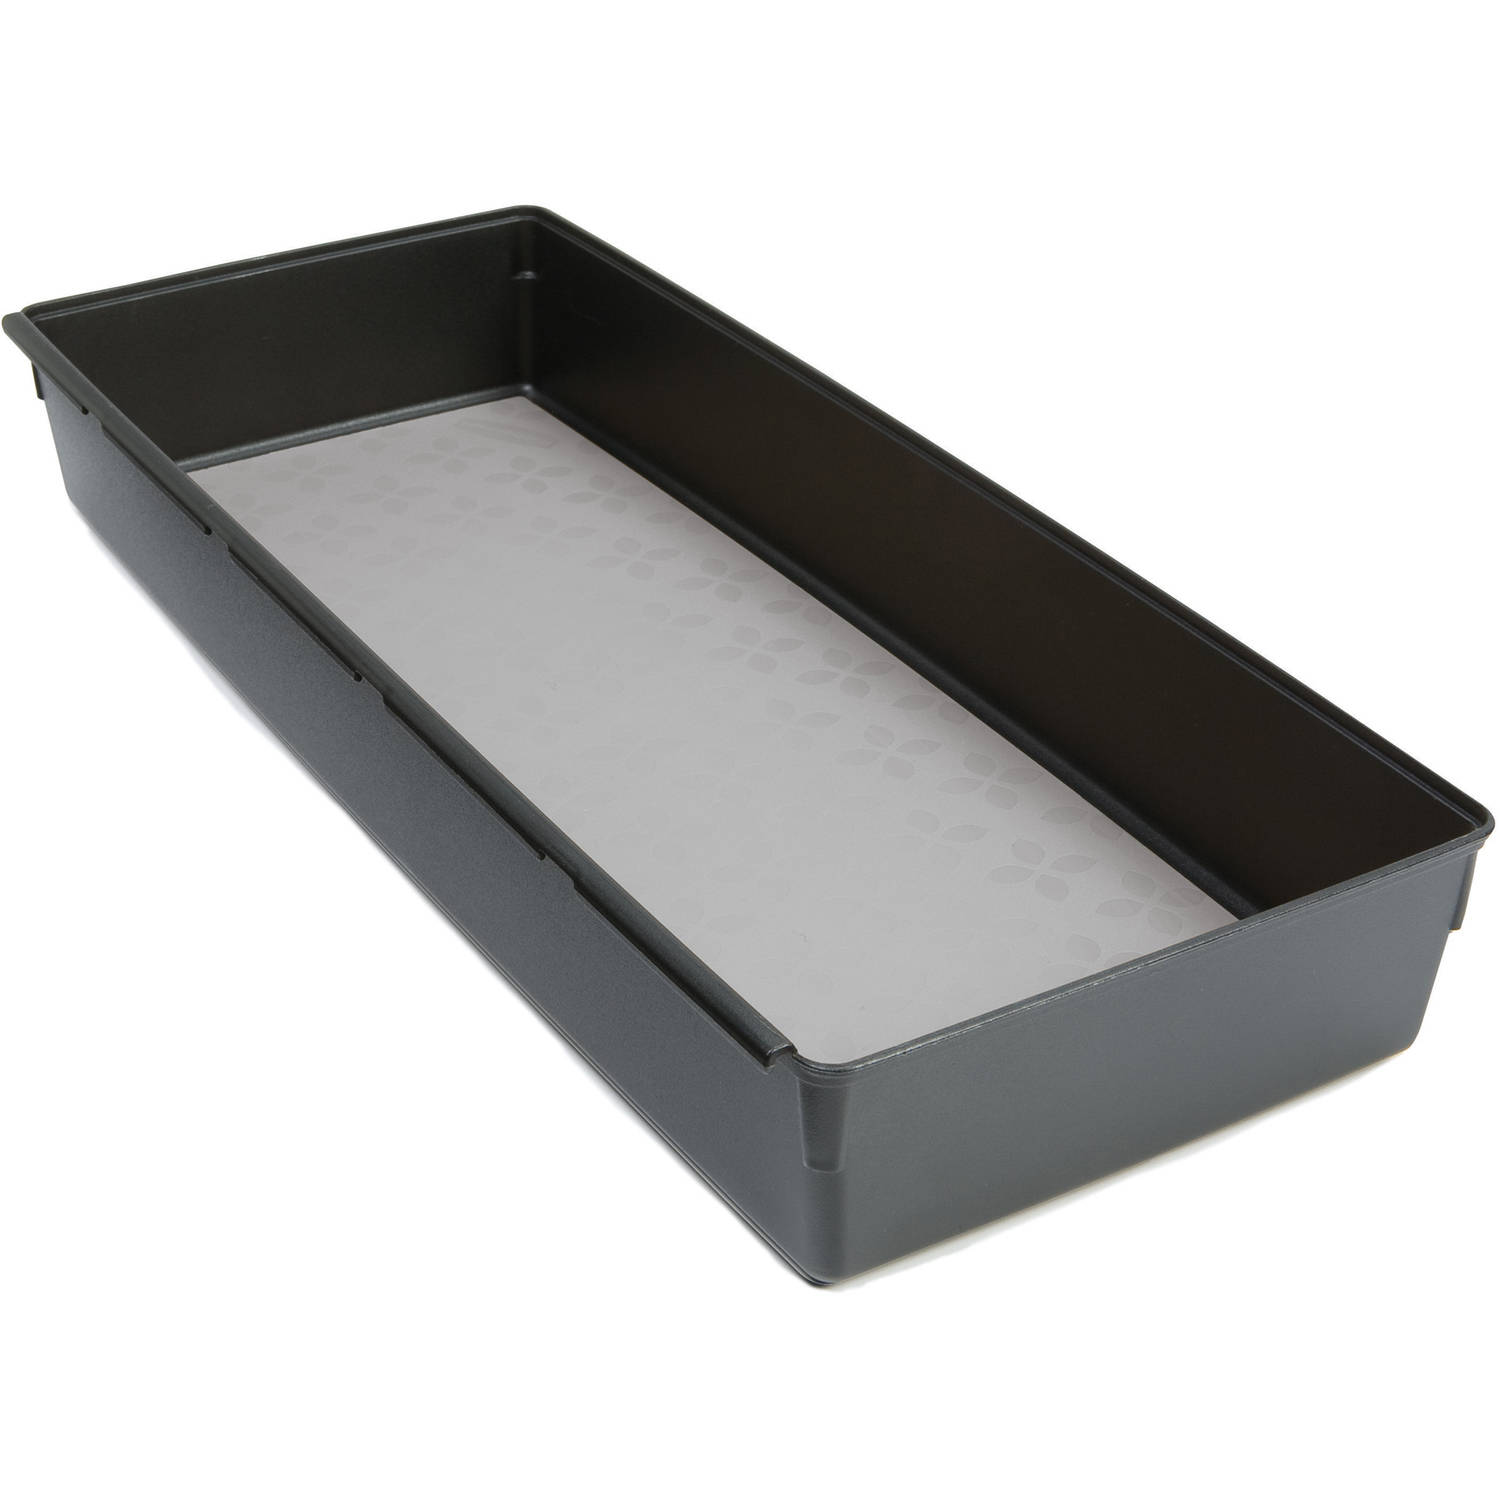 Rubbermaid, Drawer Organizer, Gray, 6 x 15 x 2 inches - image 1 of 3